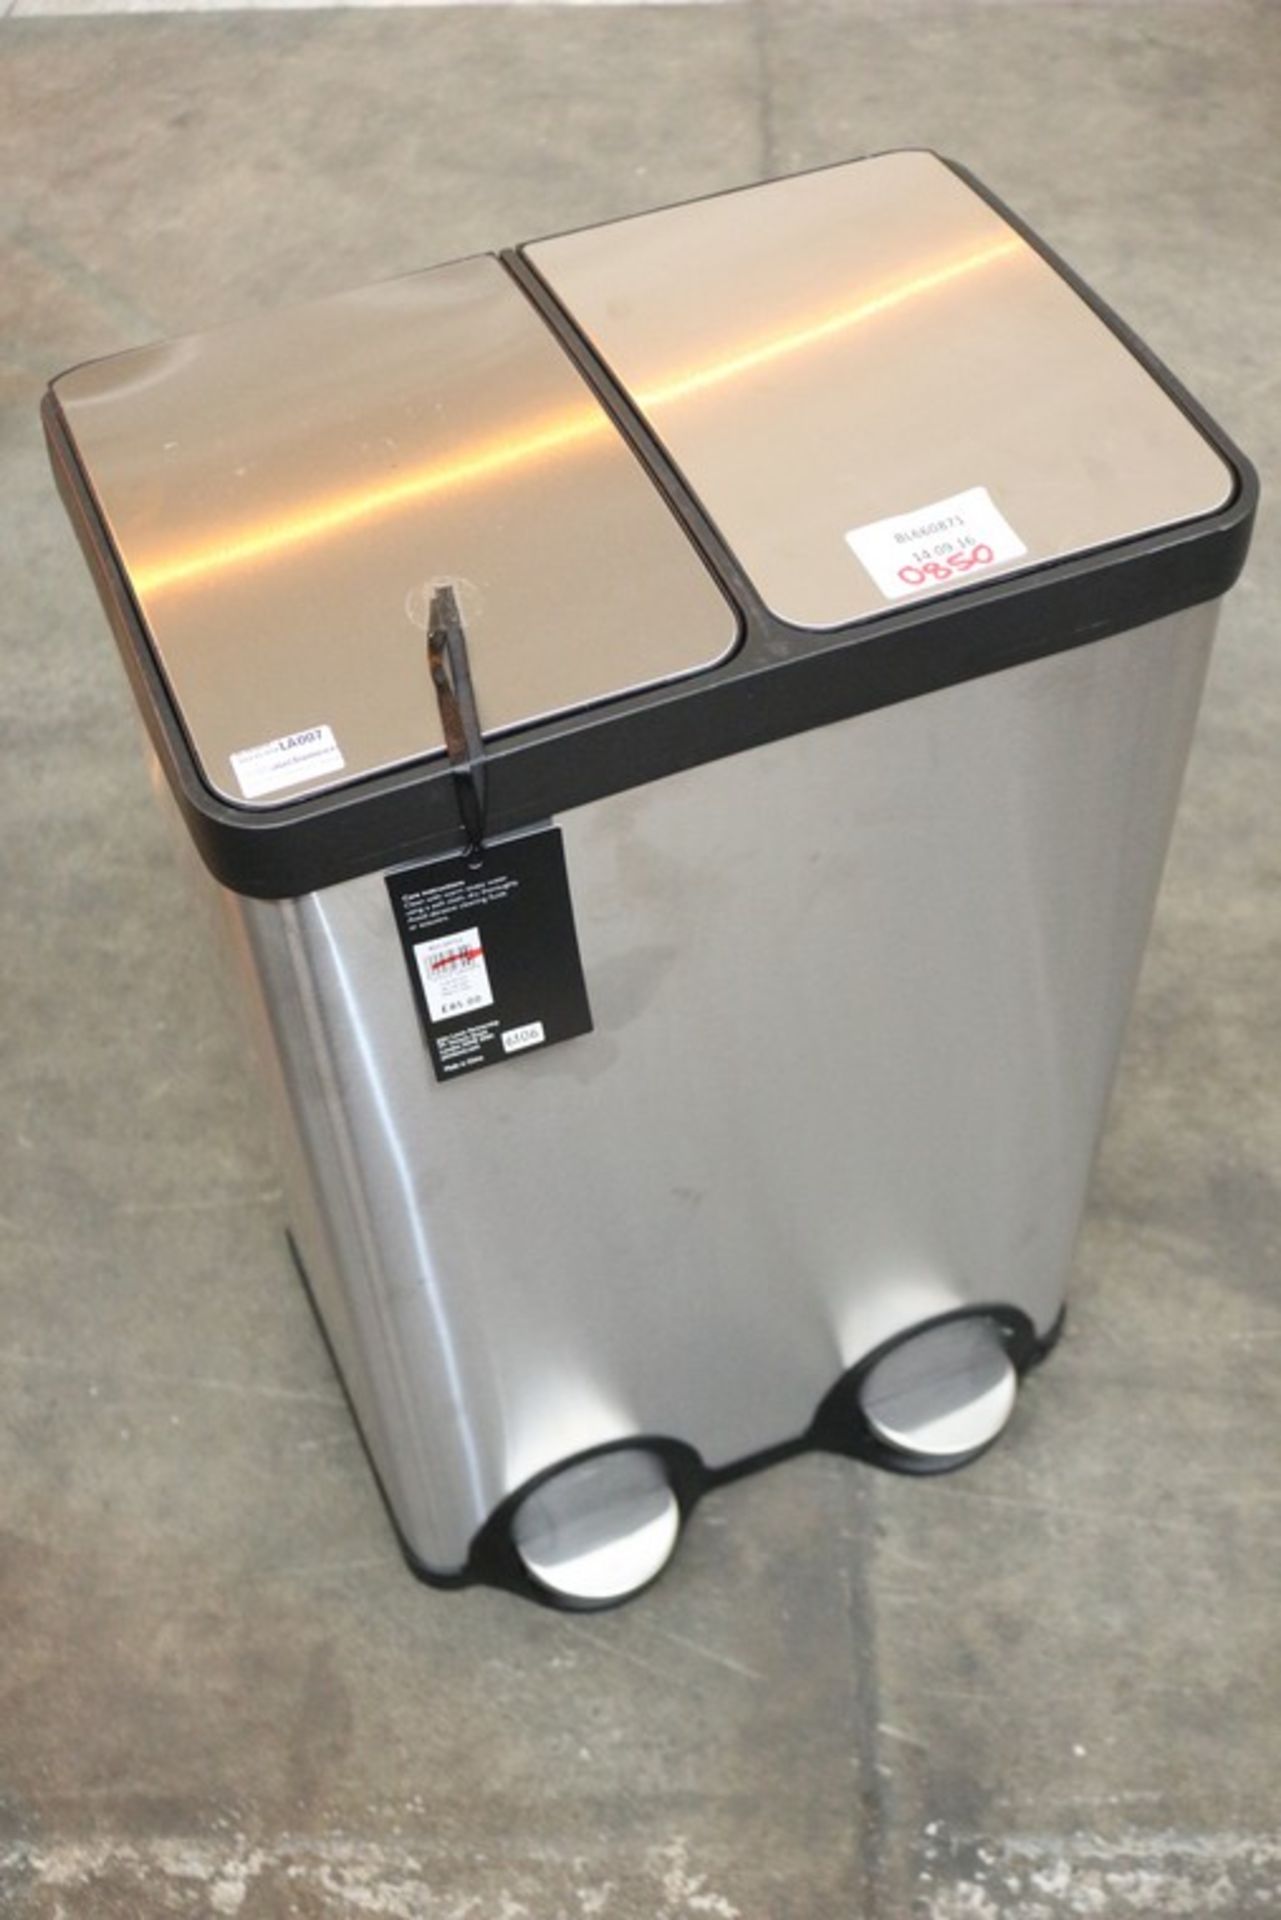 3 x ASSORTED STAINLESS STEEL TWIN RECYCLING BINS RRP £85 EACH (14.9.16) *PLEASE NOTE THAT THE BID